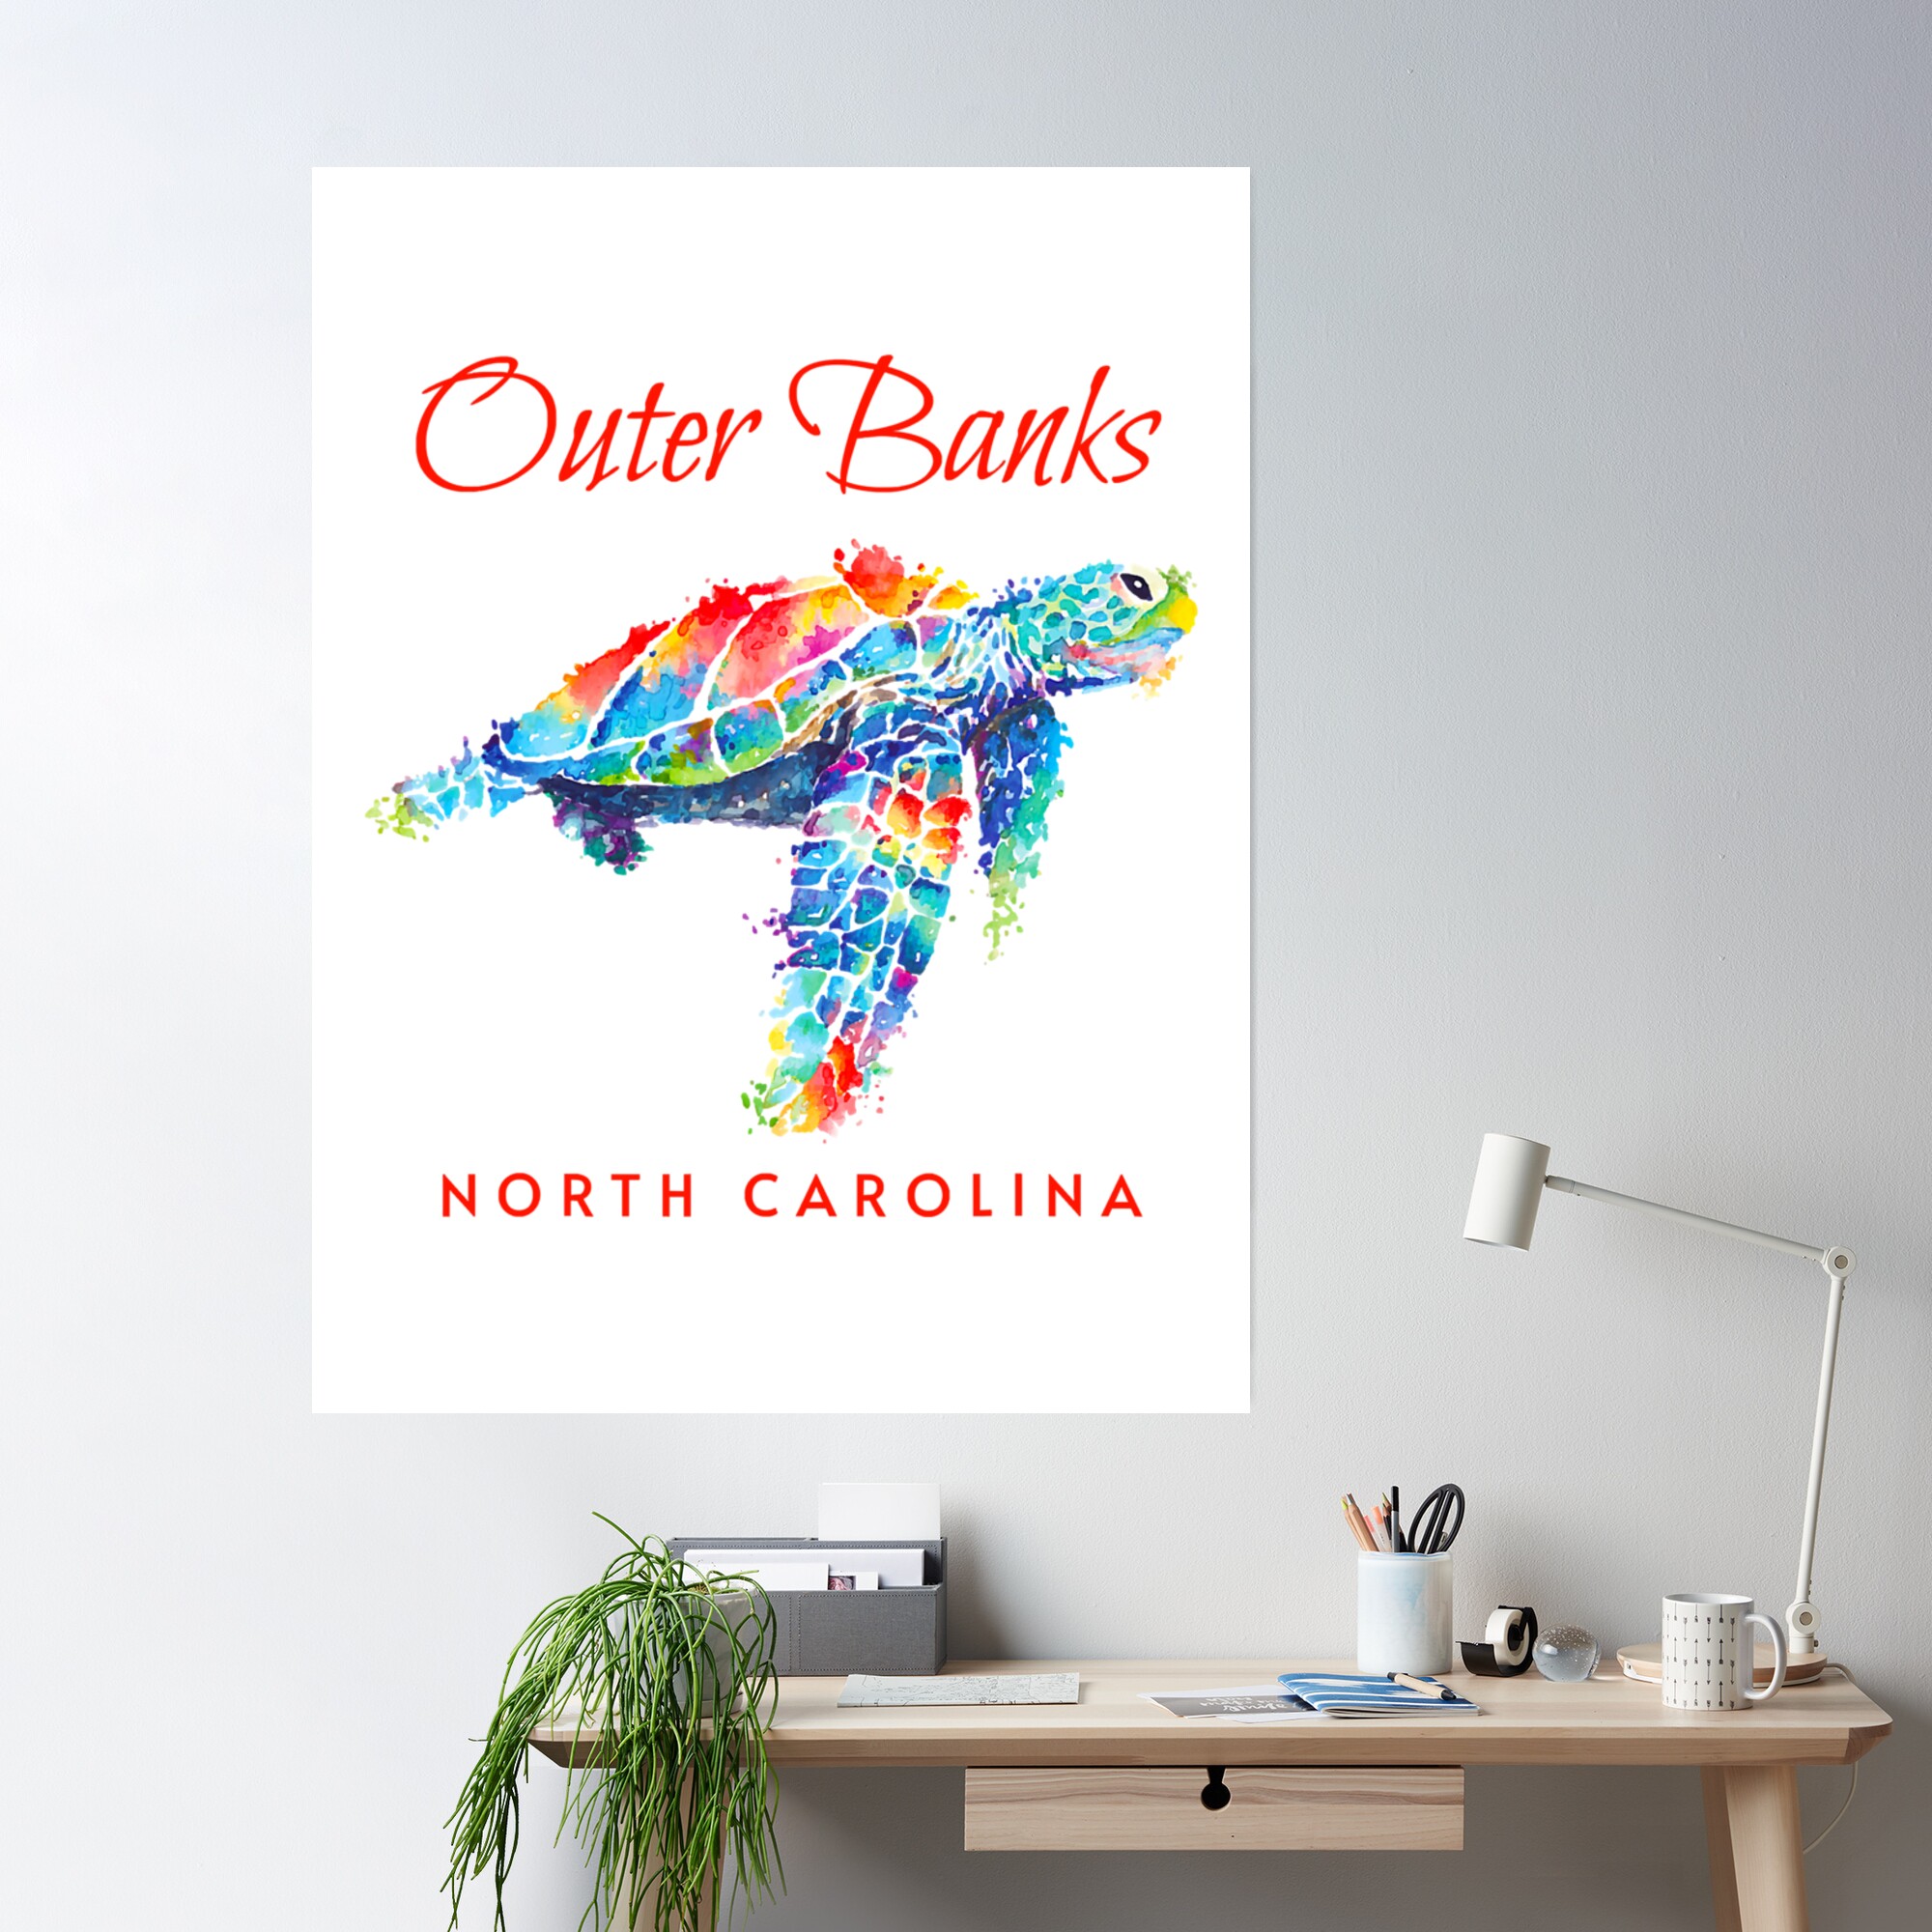 cposterlargesquare product2000x2000 8 - Outer Banks Store